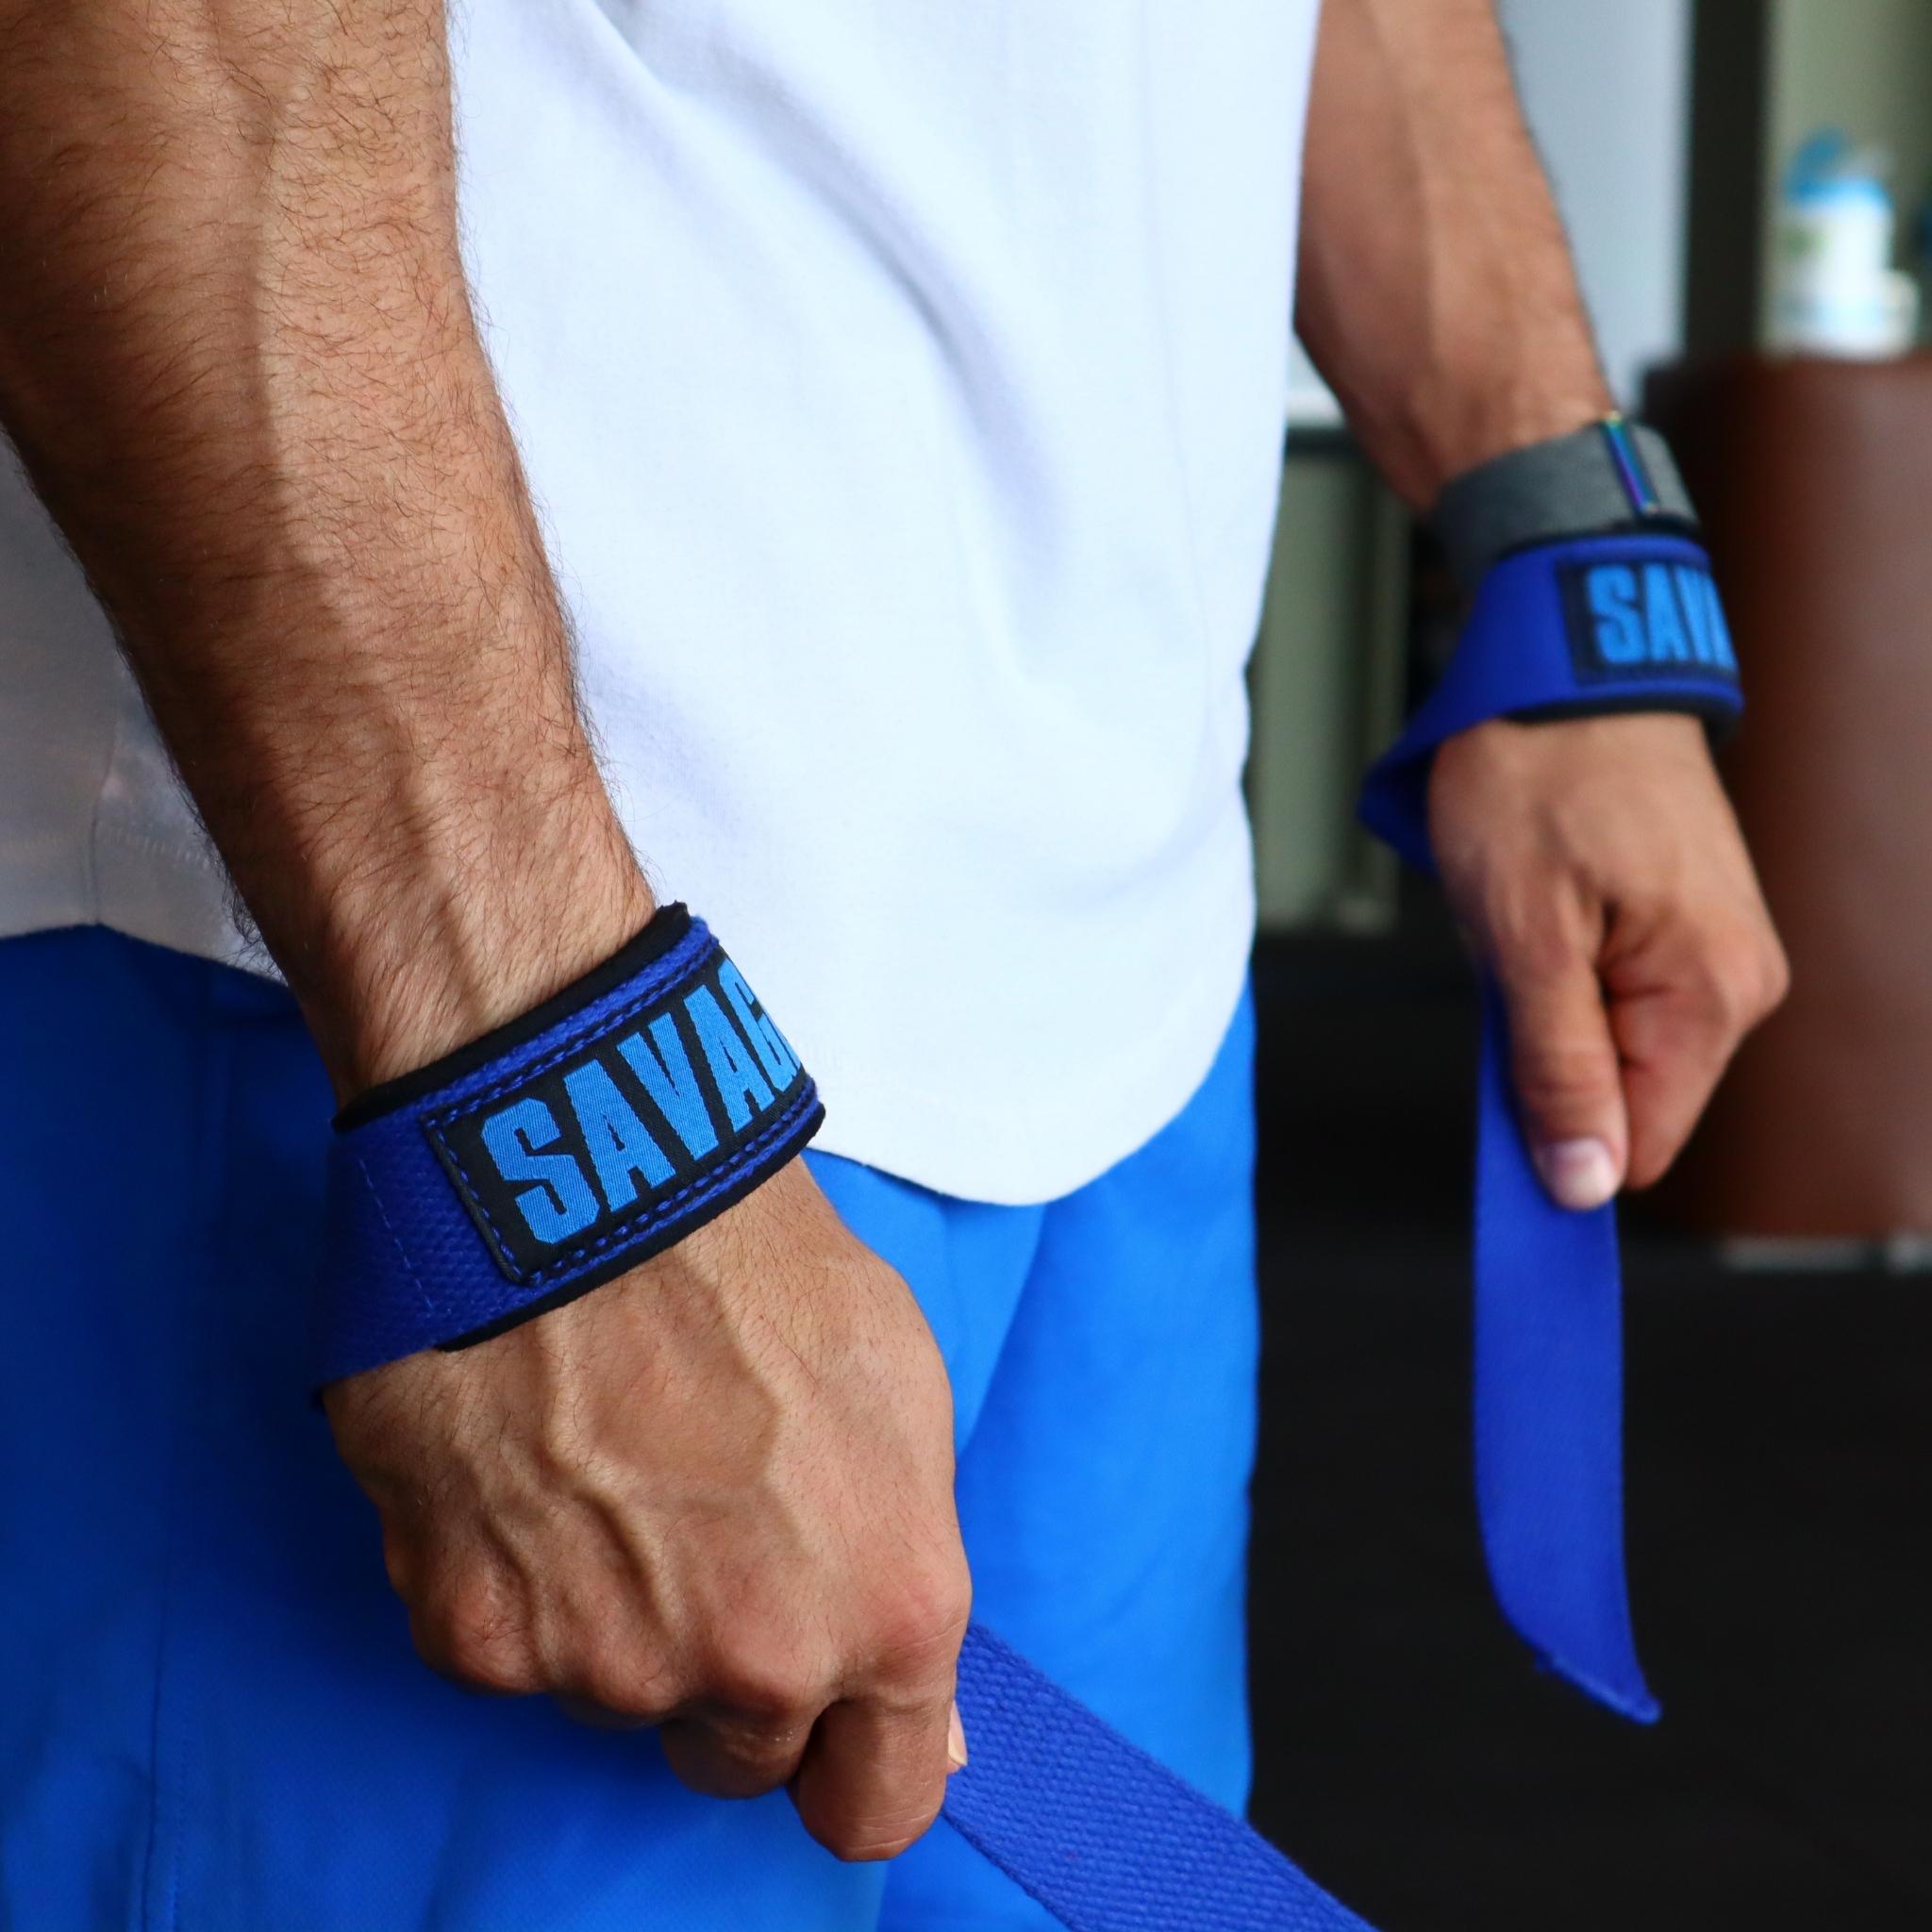 Savage Padded Lifting Straps from Genejack for Genejack WOD